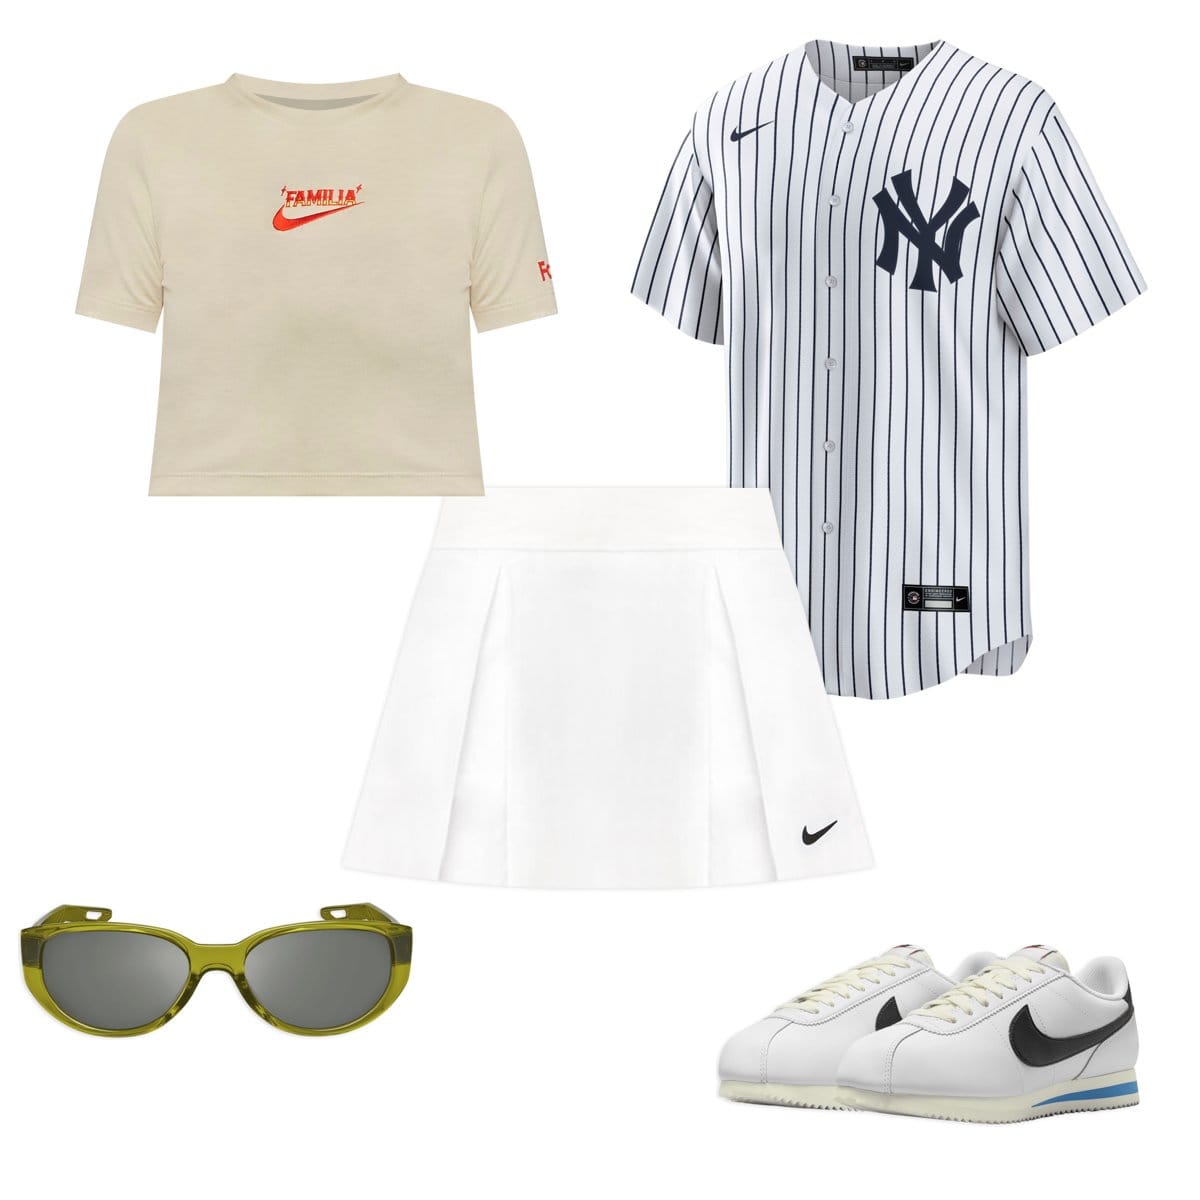 10 Best Basketball Game Outfit ideas